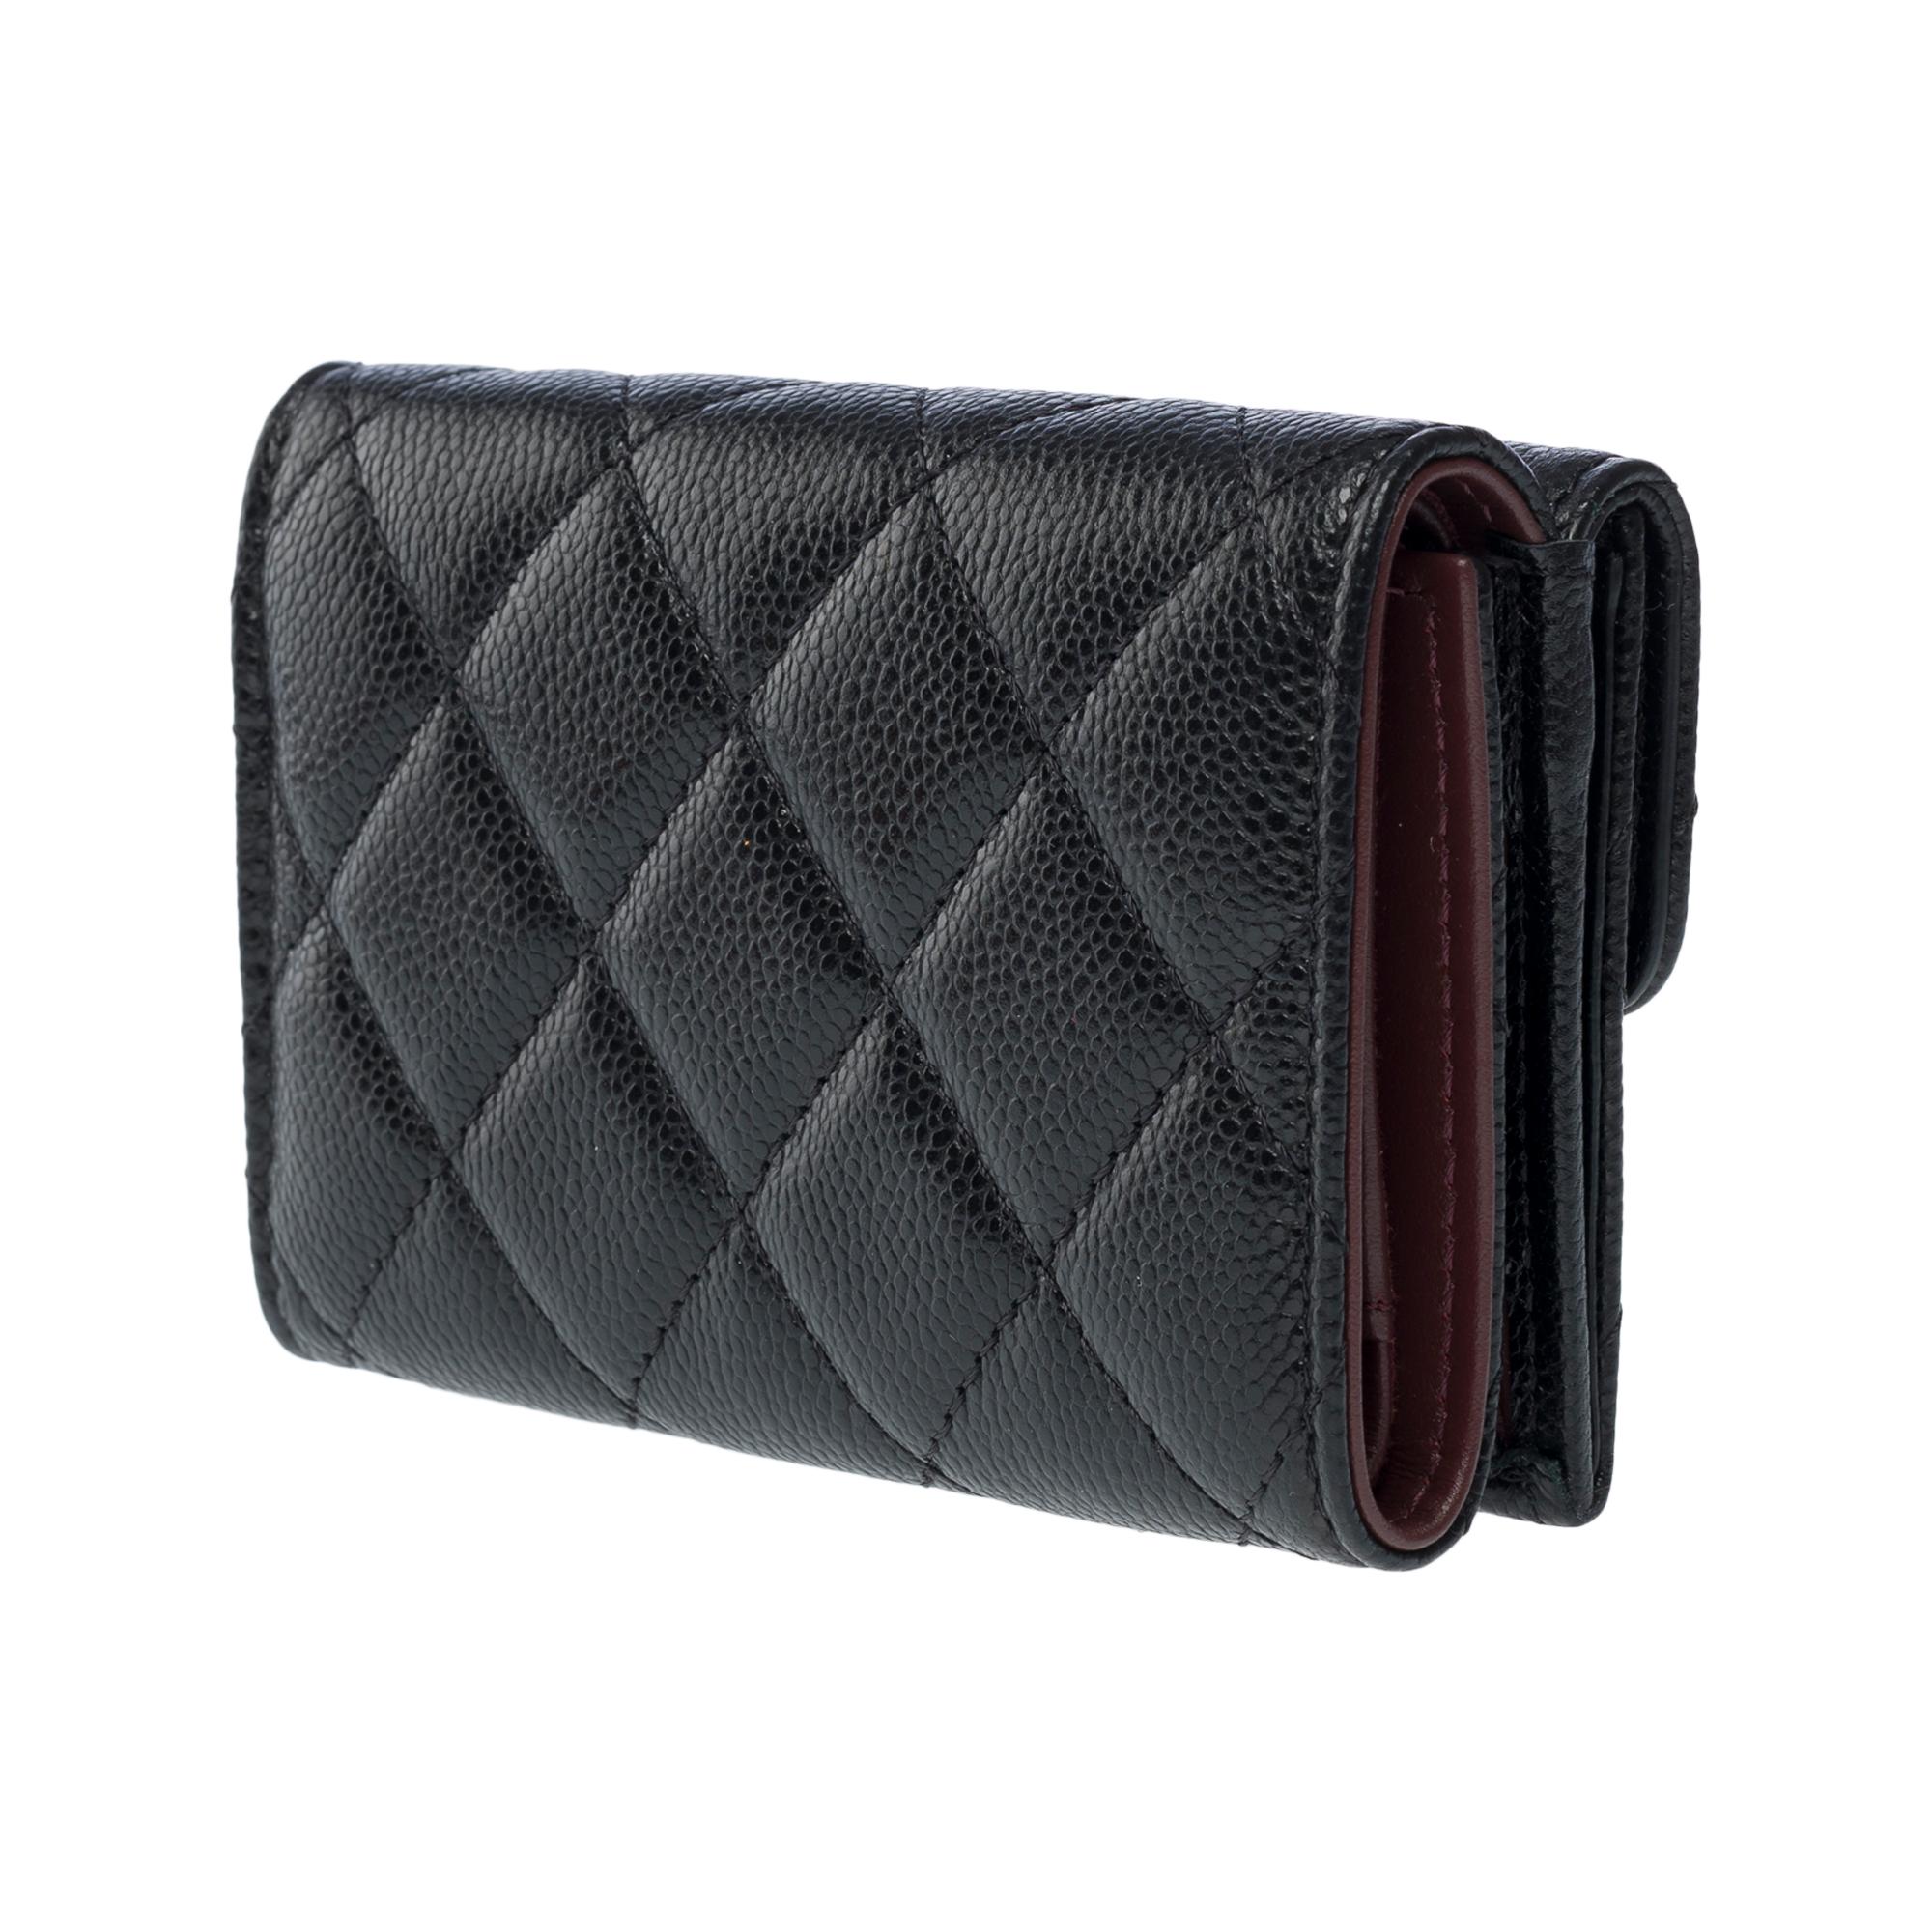 Gorgeous Chanel Wallet  in black Caviar quilted leather, GHW 2